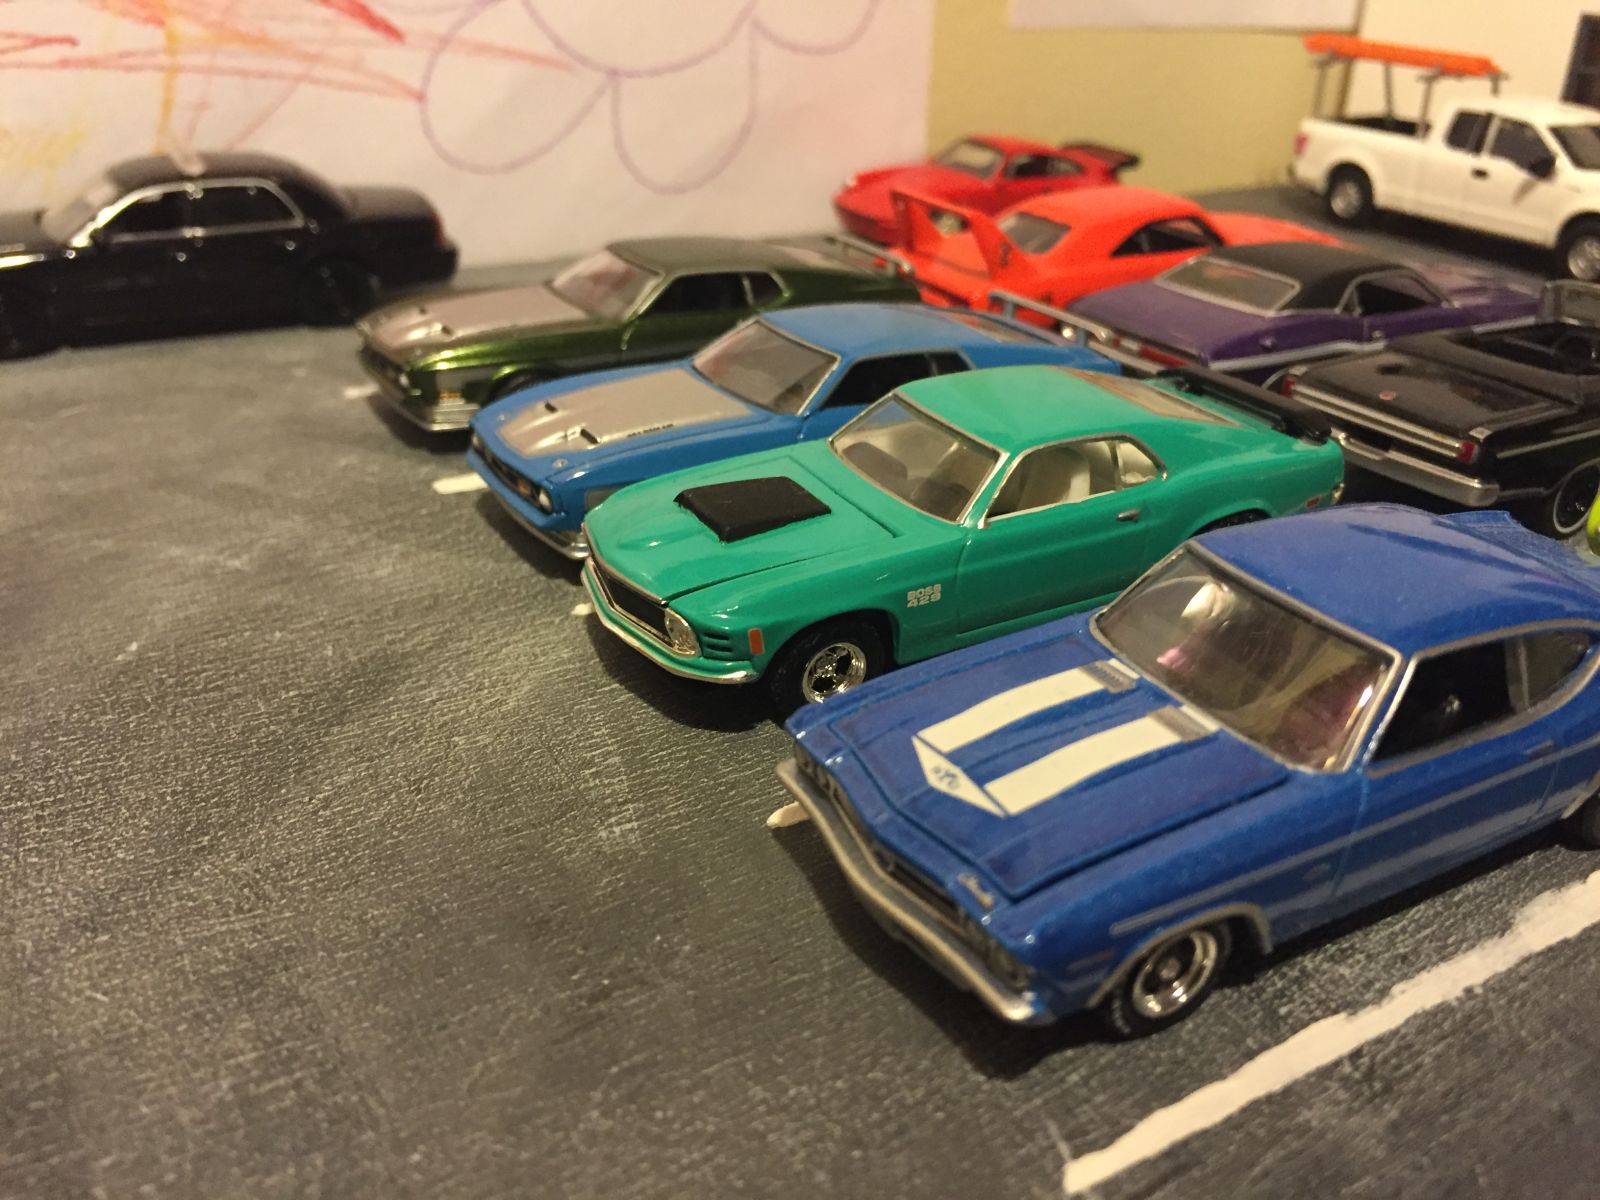 Fun fact, I’ve had that ‘70 Mustang for months now, and I believe this is the first time it made it to the diorama.